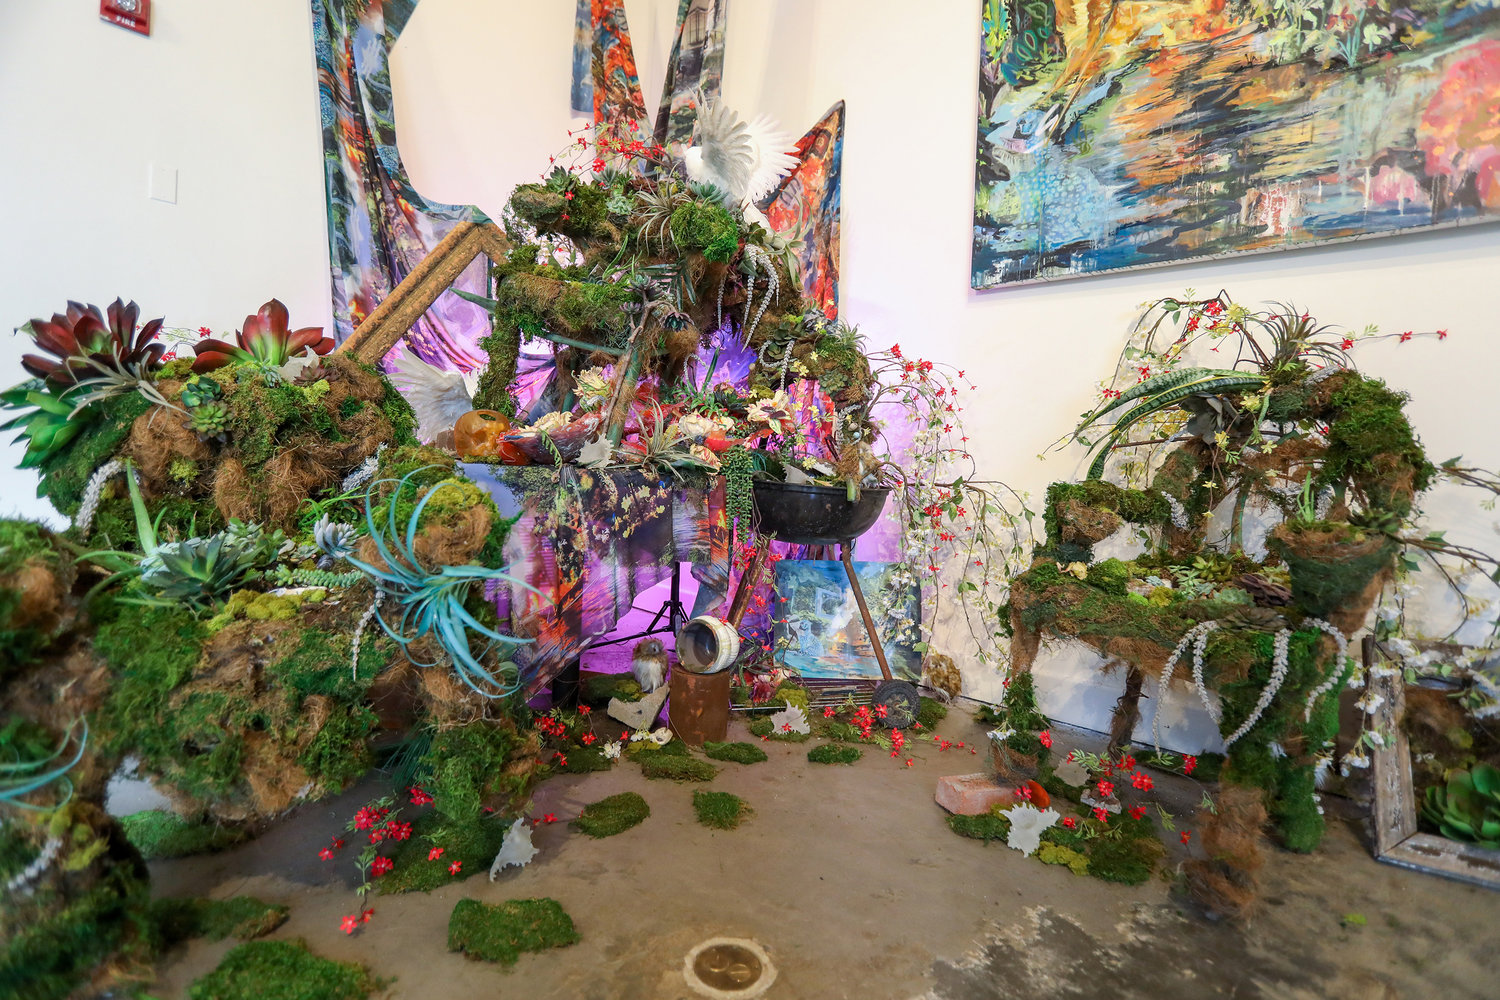 Natalie Collette Wood’s ‘The Dinner After the Storm,’ which she says depicts an ‘abandoned dinner party that's gone awry with animals and natural plants and moss and succulents taking over,’ is part of ‘Eco-Urgency: Now or Never’ — an exhibition focused on the effects of climate change currently showing at the Lehman College Art Gallery.